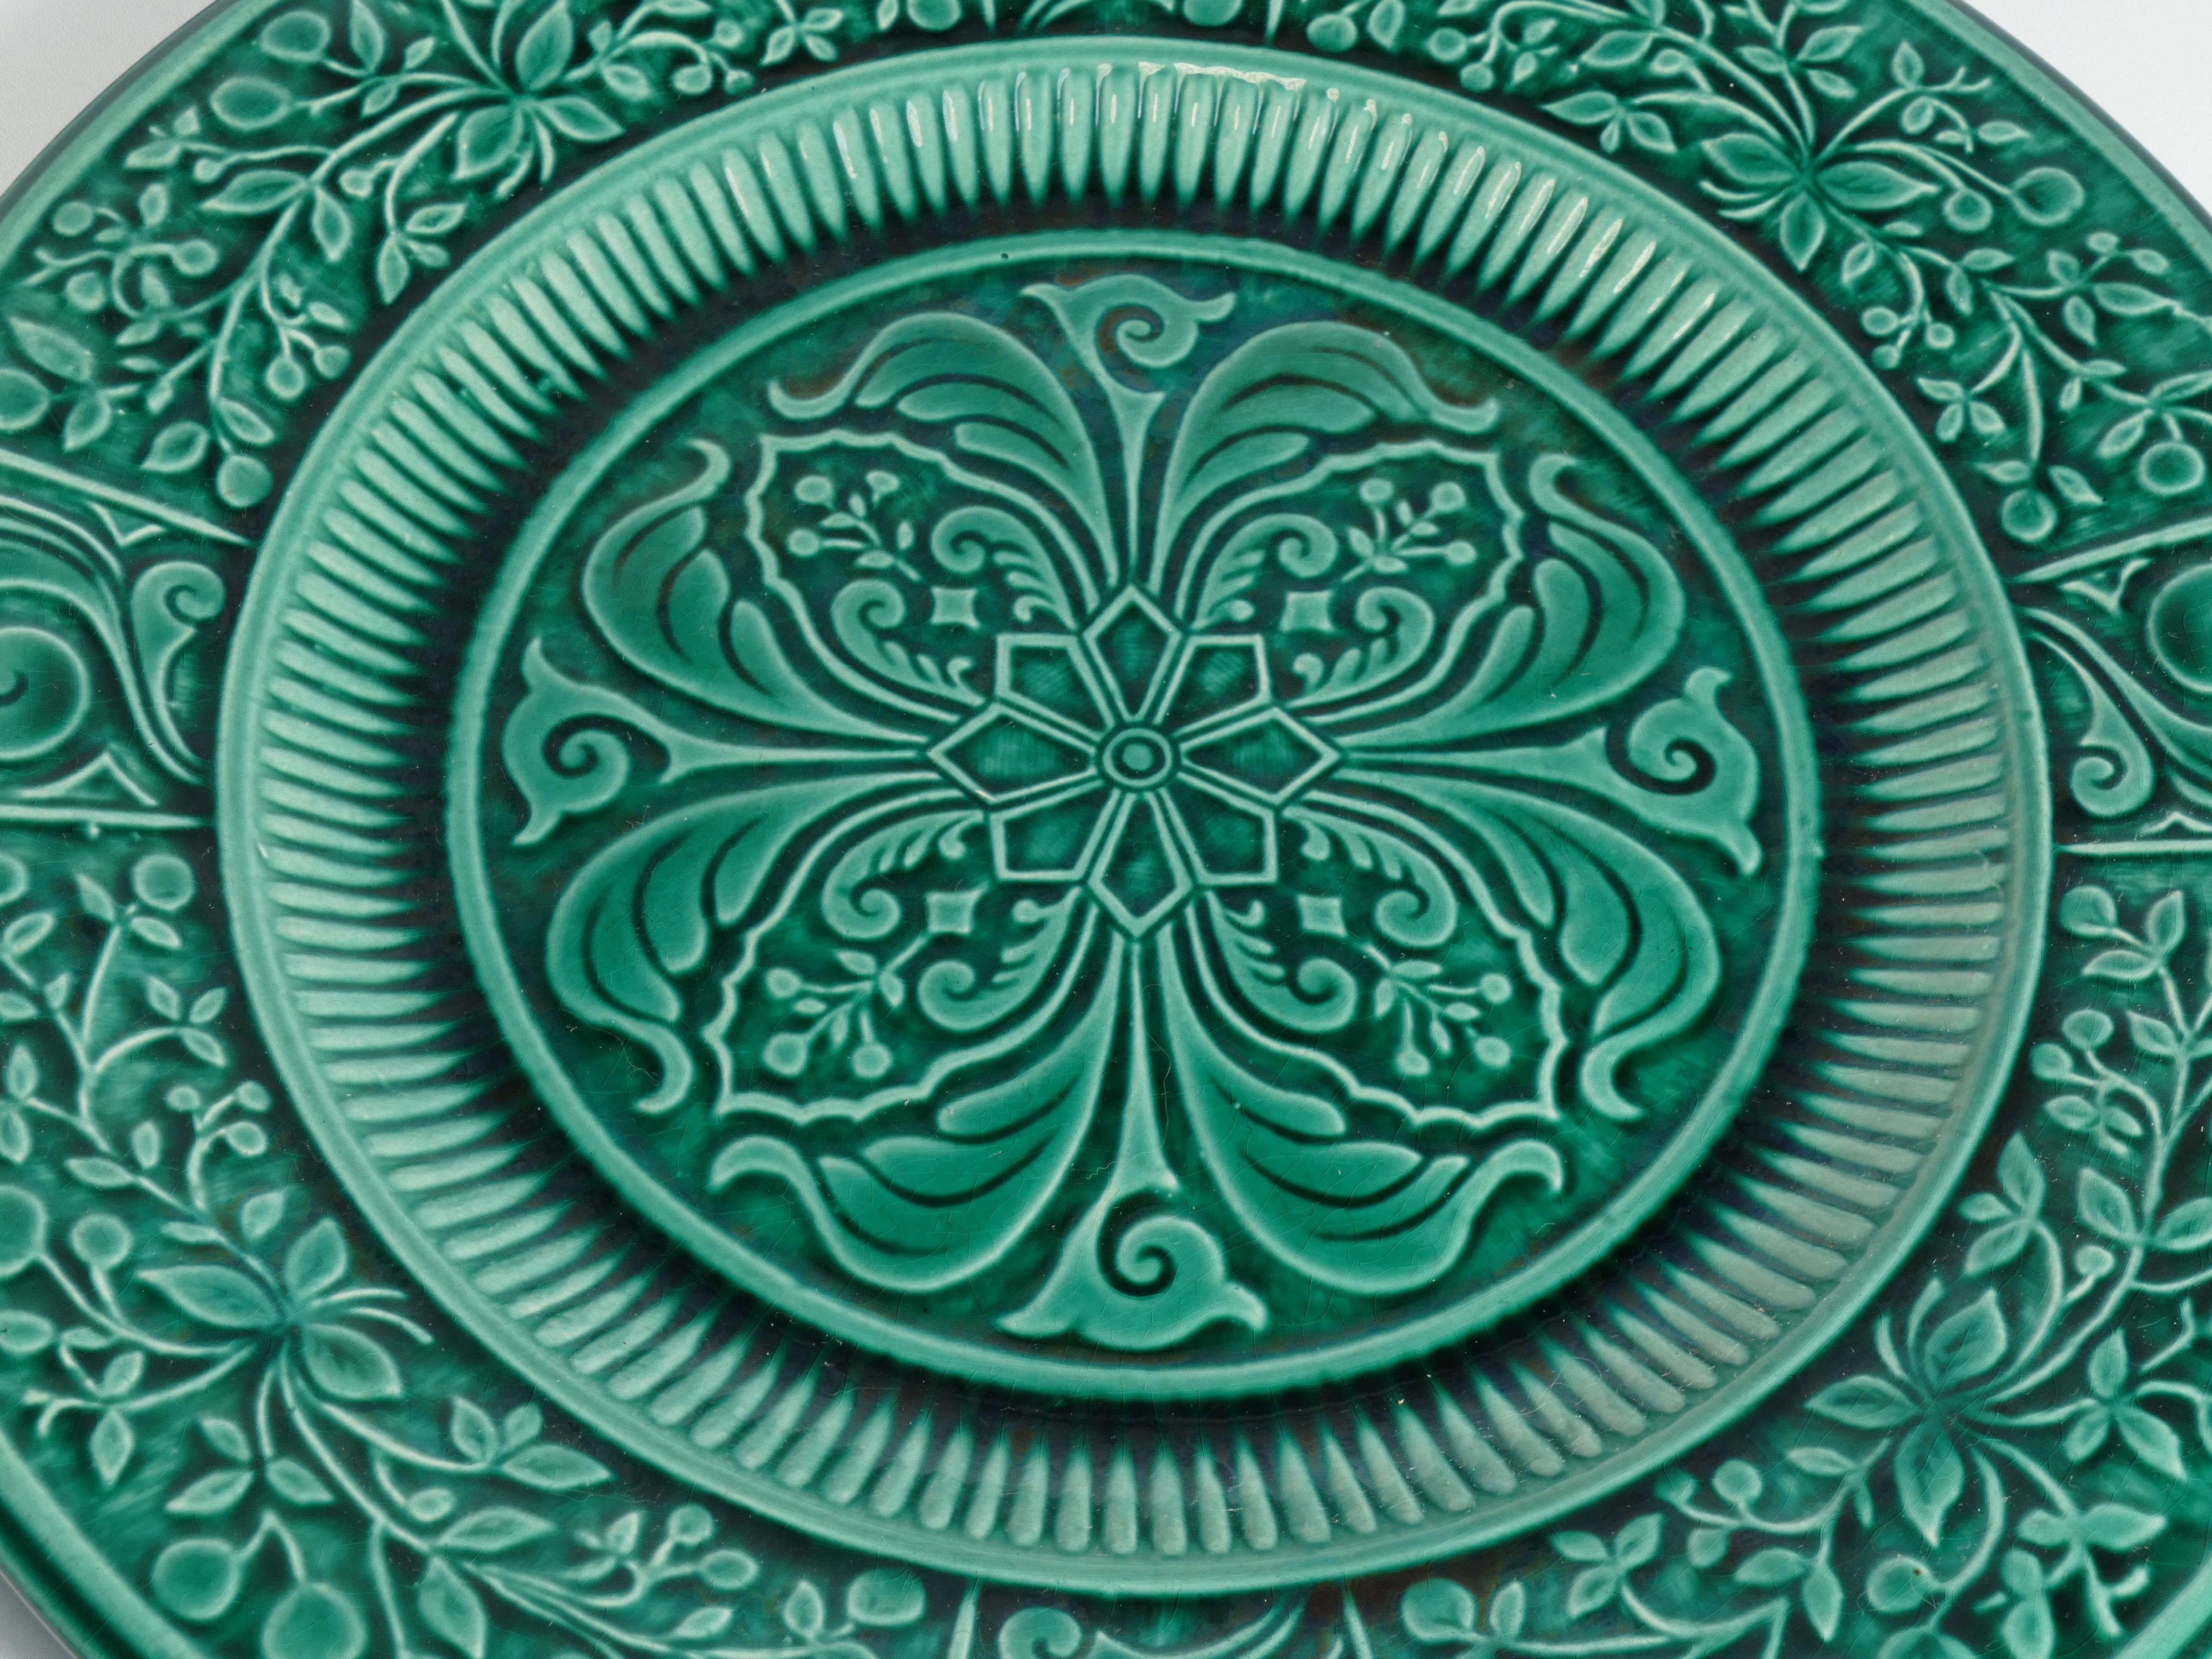 Incredibly beautiful large Scandinavian modern green plate with pattern from Arol ceramic, Halden Norway, 1950s.

Arol Ceramic Factory 1943-1980
It was two creative guys who joined forces and established what would grow to become the Arol ceramics